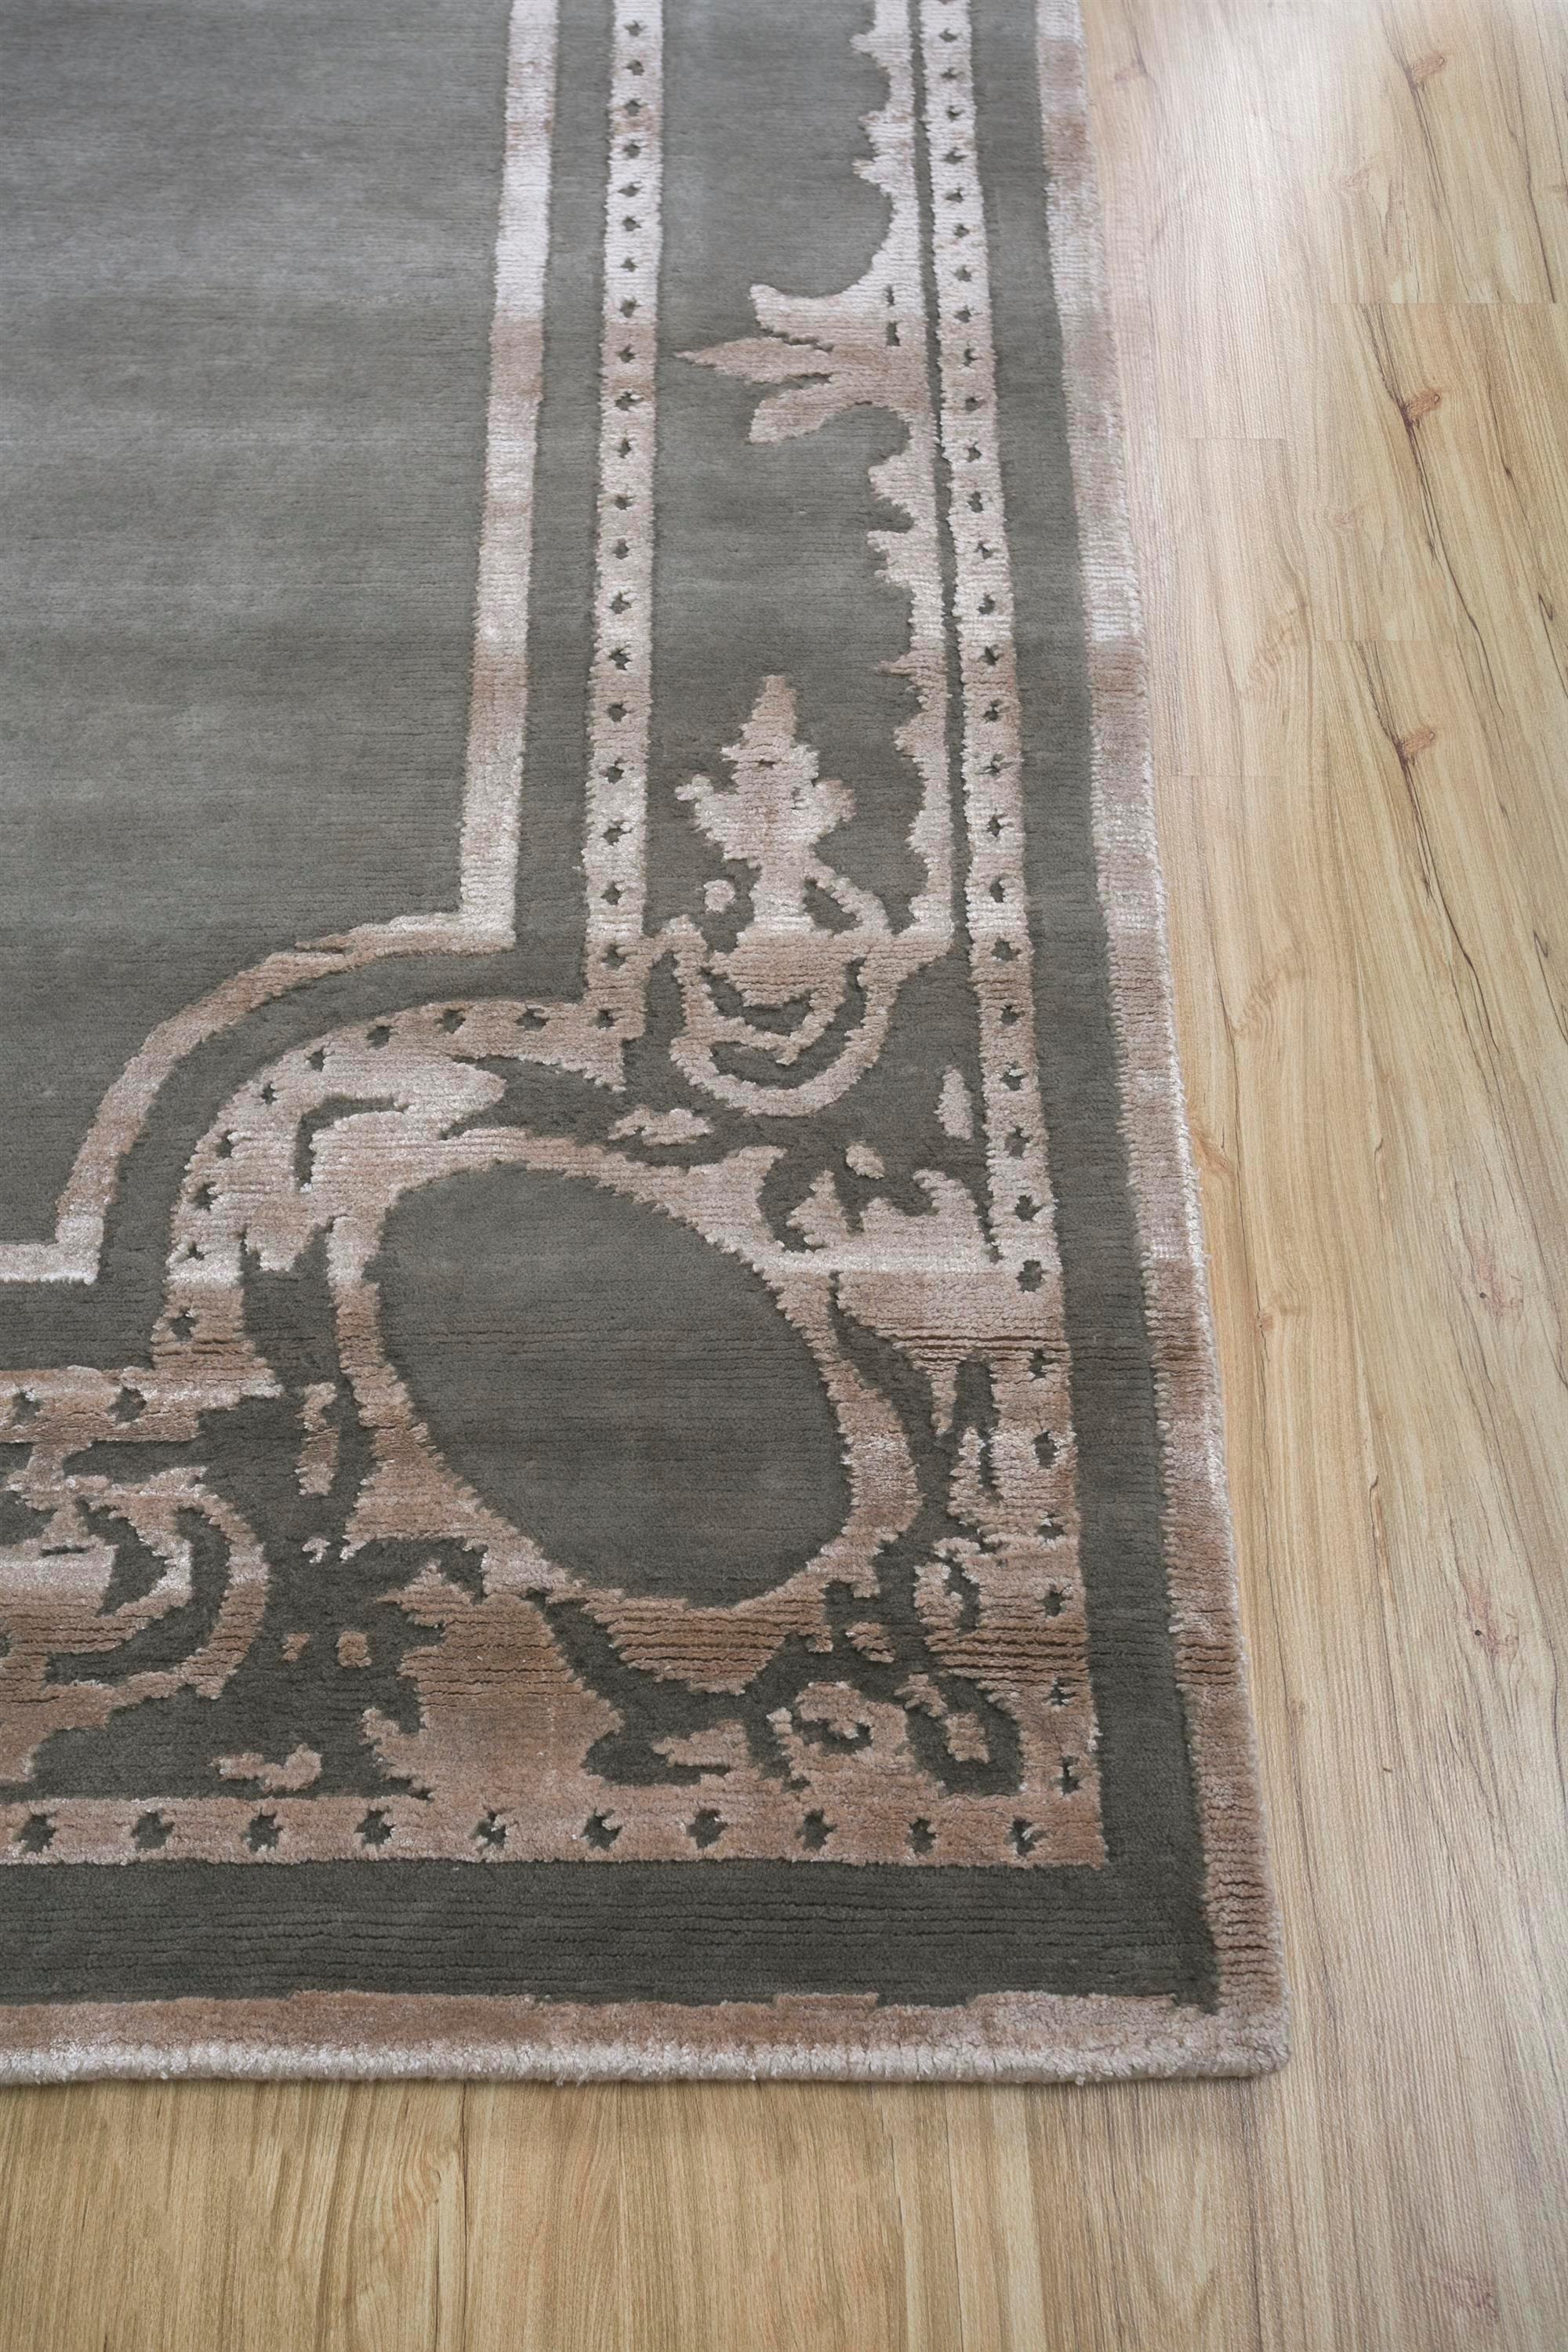 Can a rug redefine the ambiance of your space? Meet this modern, hand-knotted rug . Grounded in a tone-on-tone palette with nickel as its base and a light coffee border, it effortlessly uplifts the mood of any room. Handmade in rural India, this rug